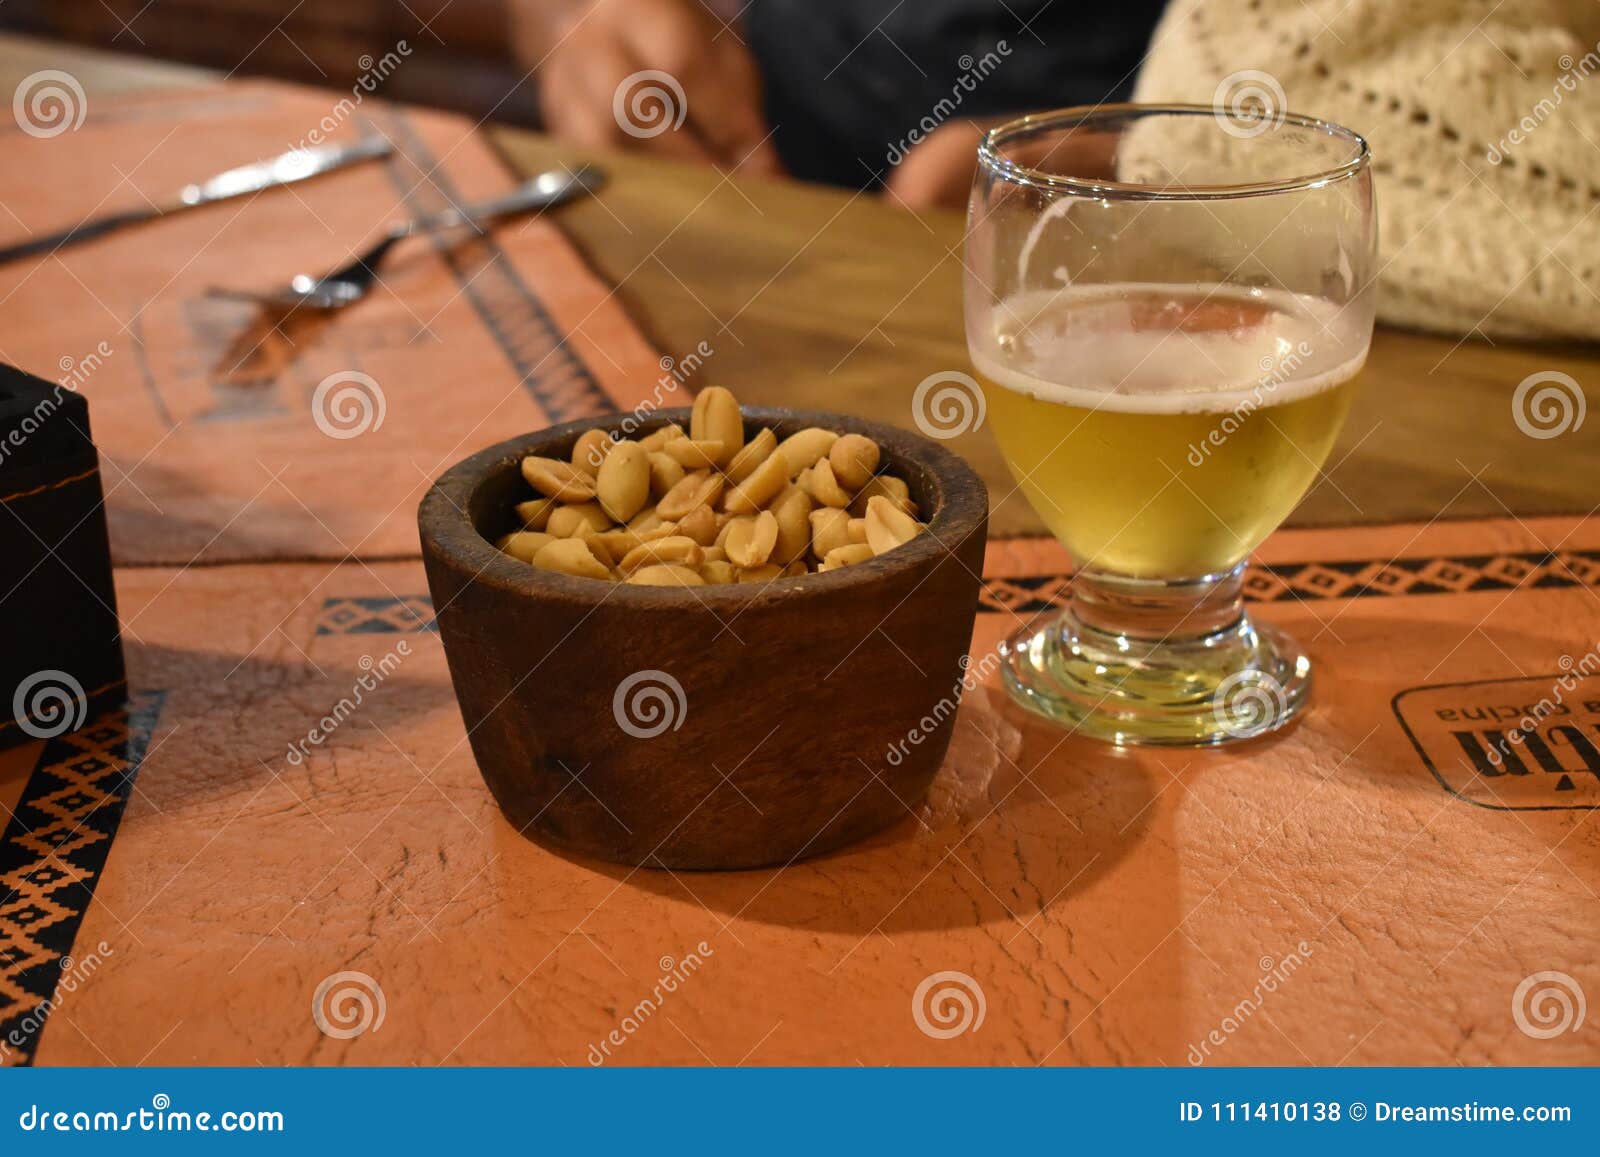 beer and peanut table